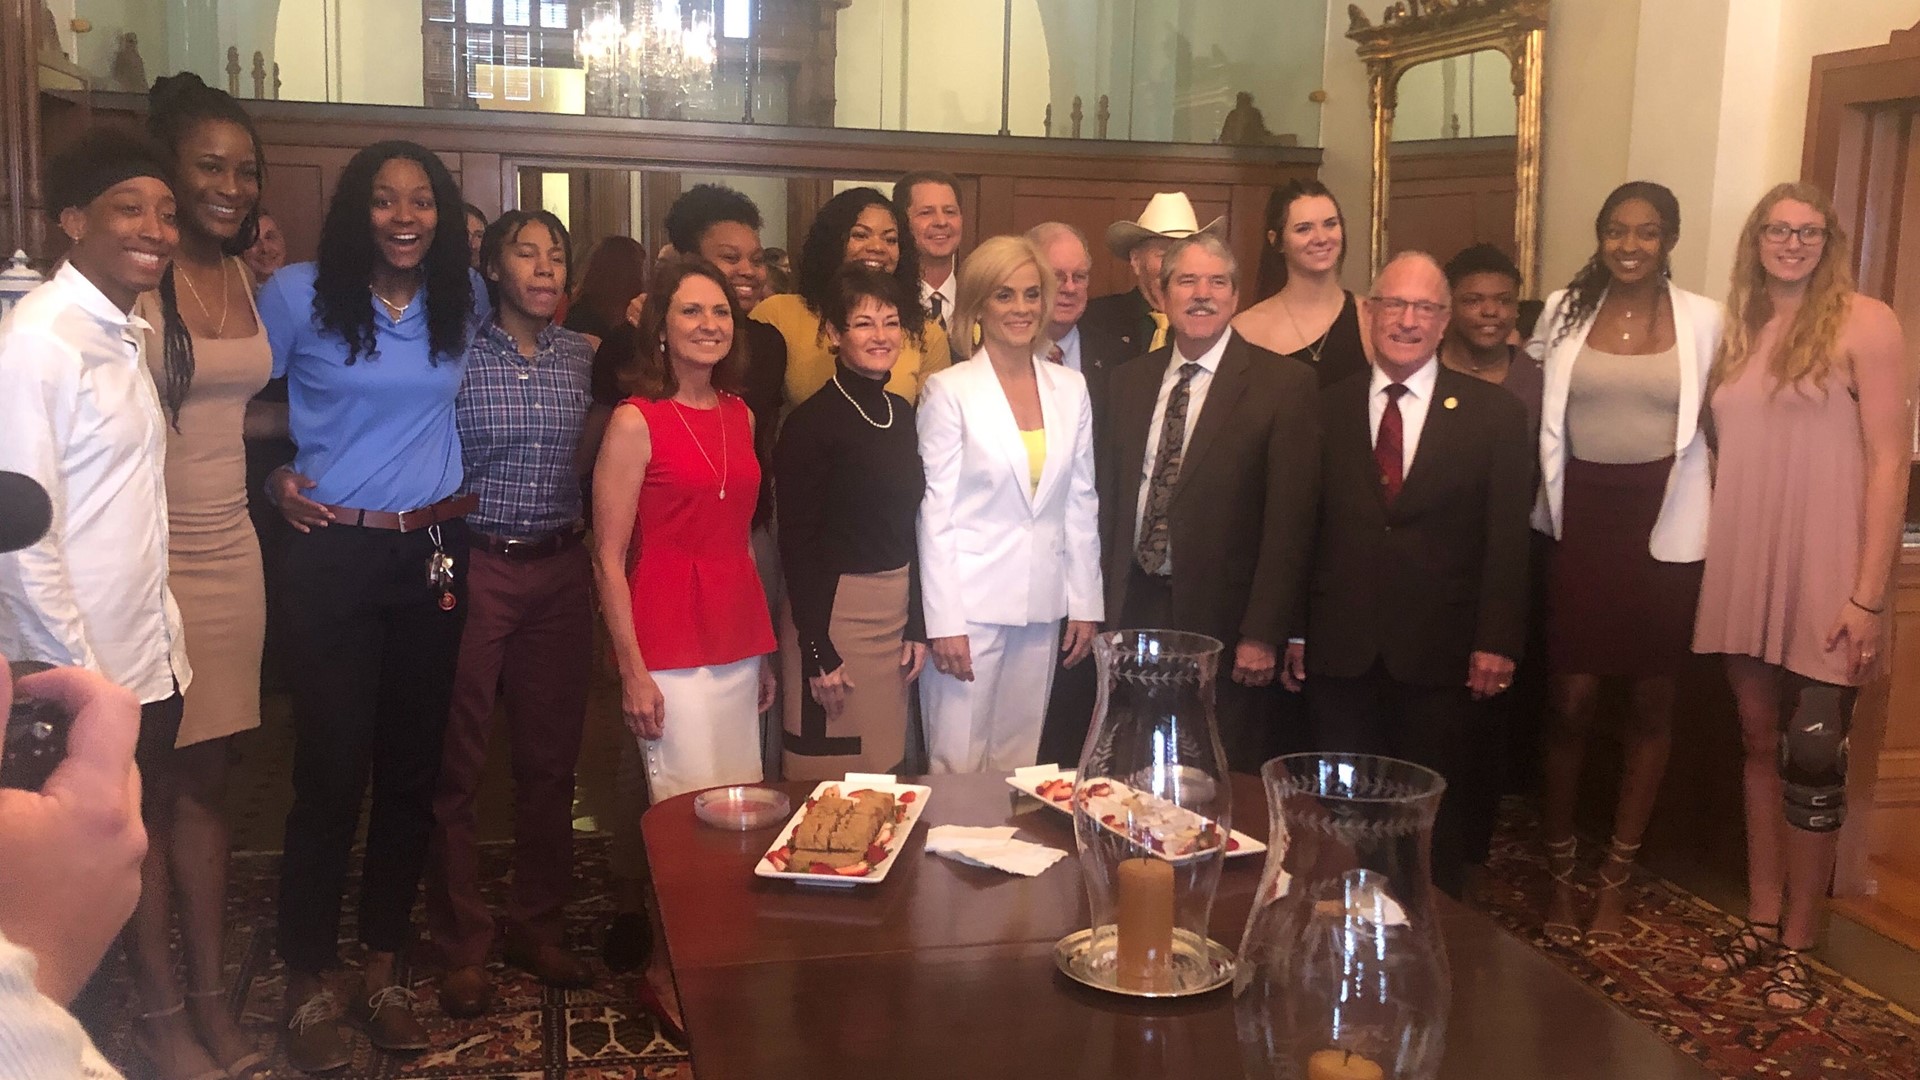 The National Champions visited with Governor Greg Abbott and Texas lawmakers in Austin Wednesday.